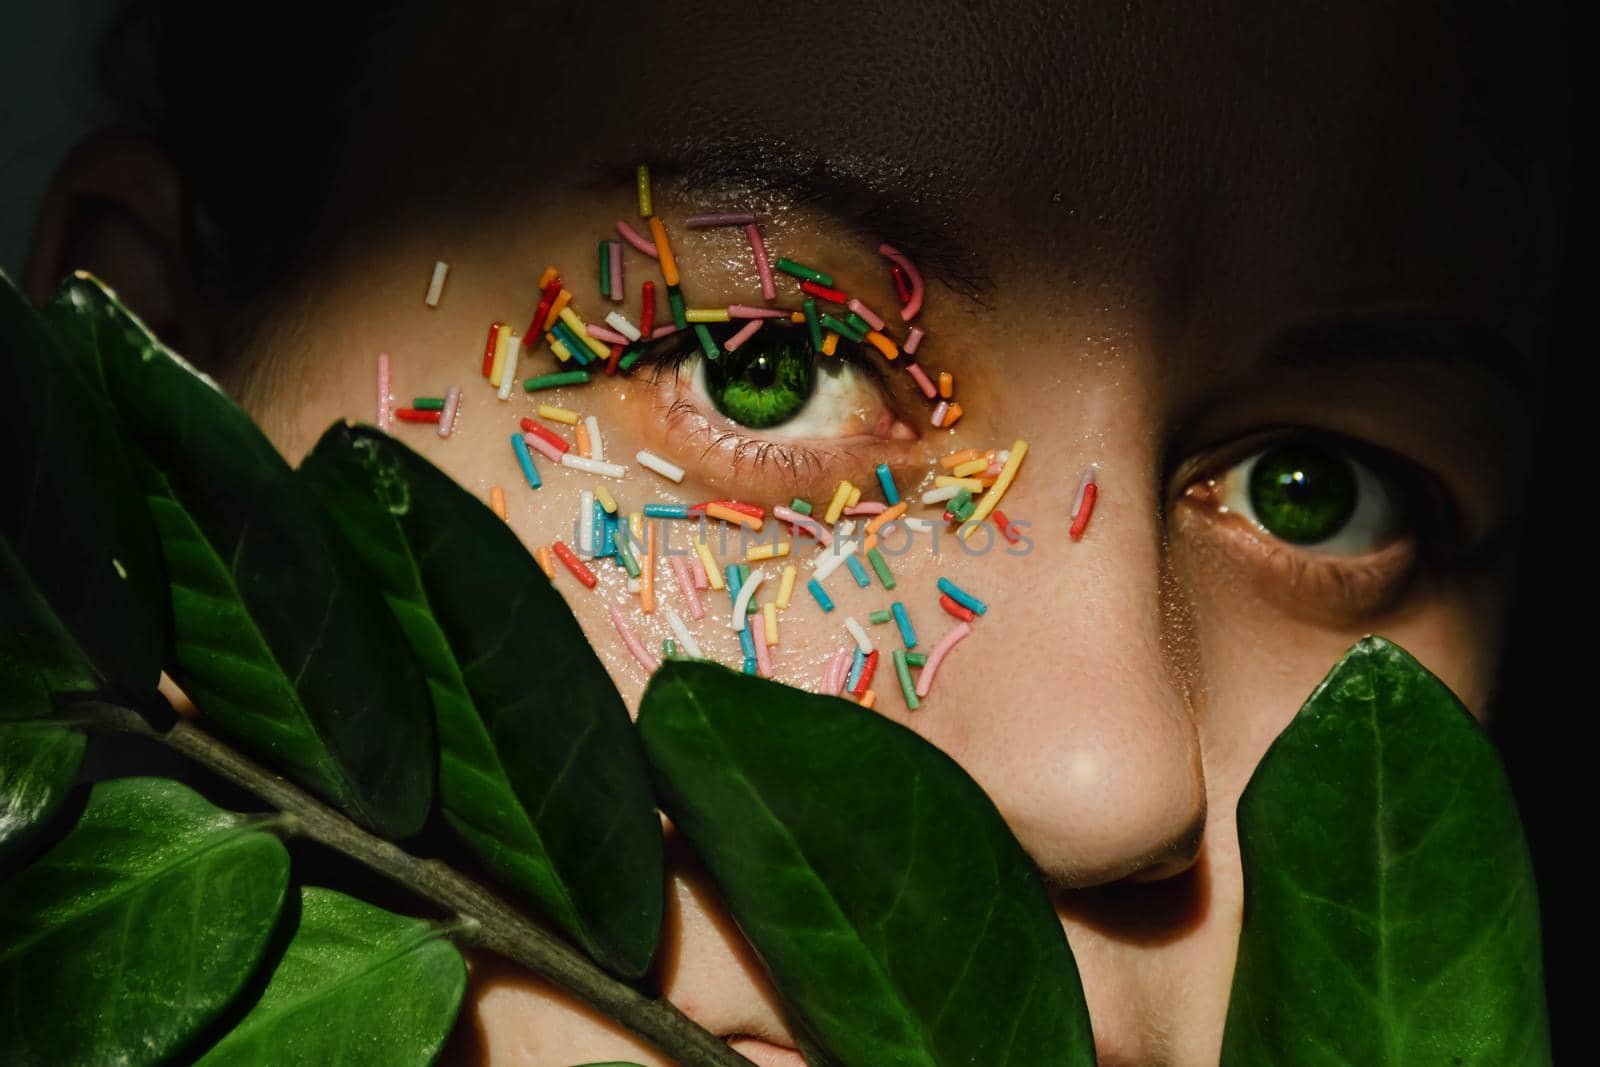 An open, green woman's eye with a sweet, multicolored sprinkle on the eyelid and a plant with large, green leaves